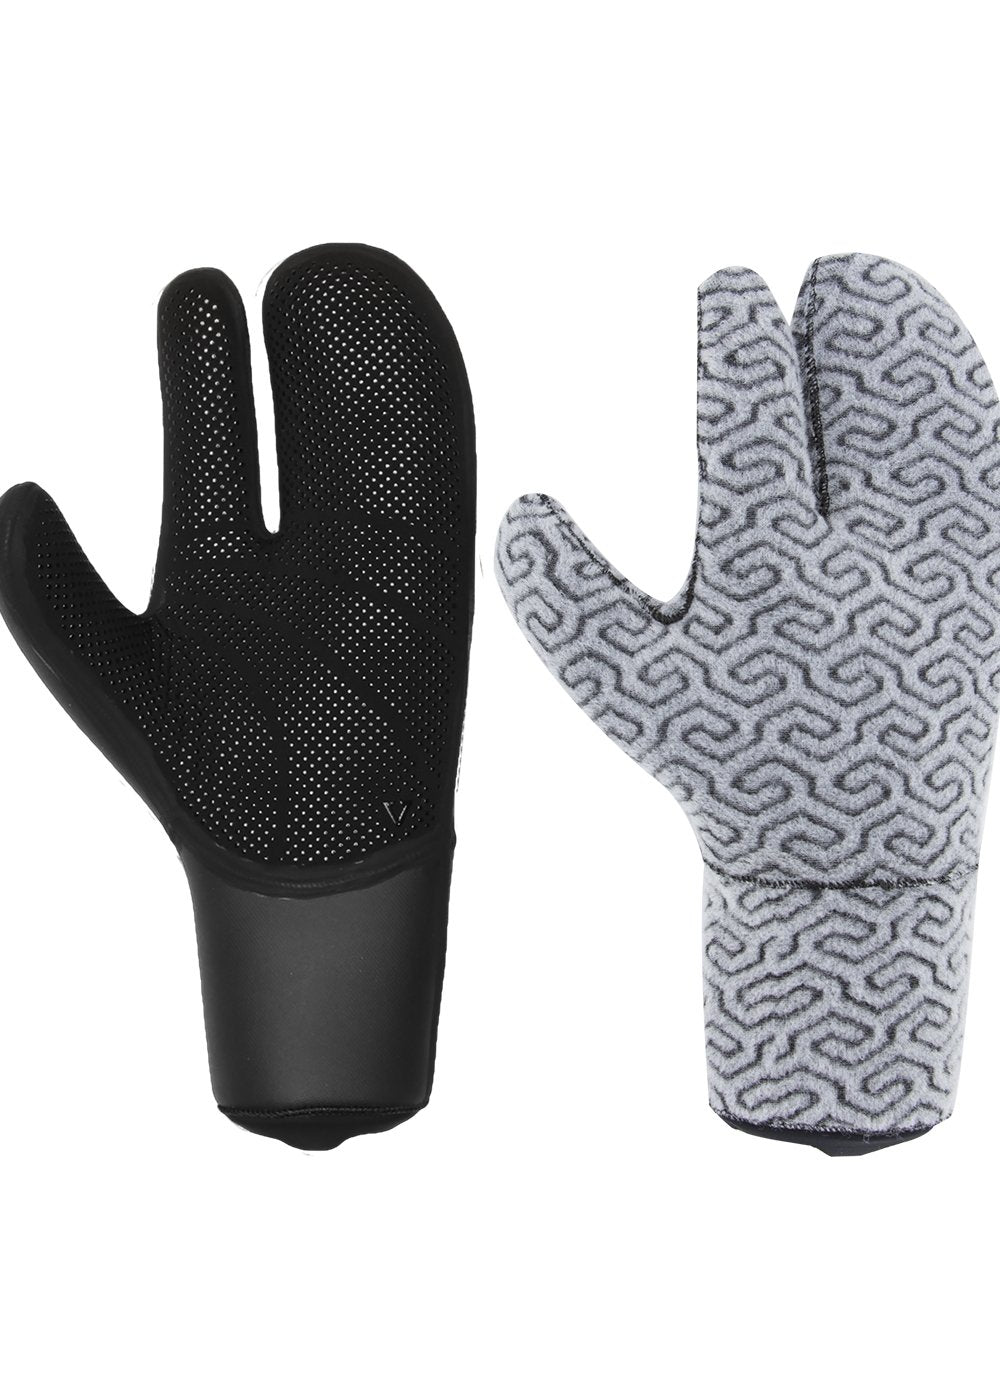 Vissla Men's Black 7 Seas 5MM Claw Wetsuit Glove. Bottom and Lining  View.